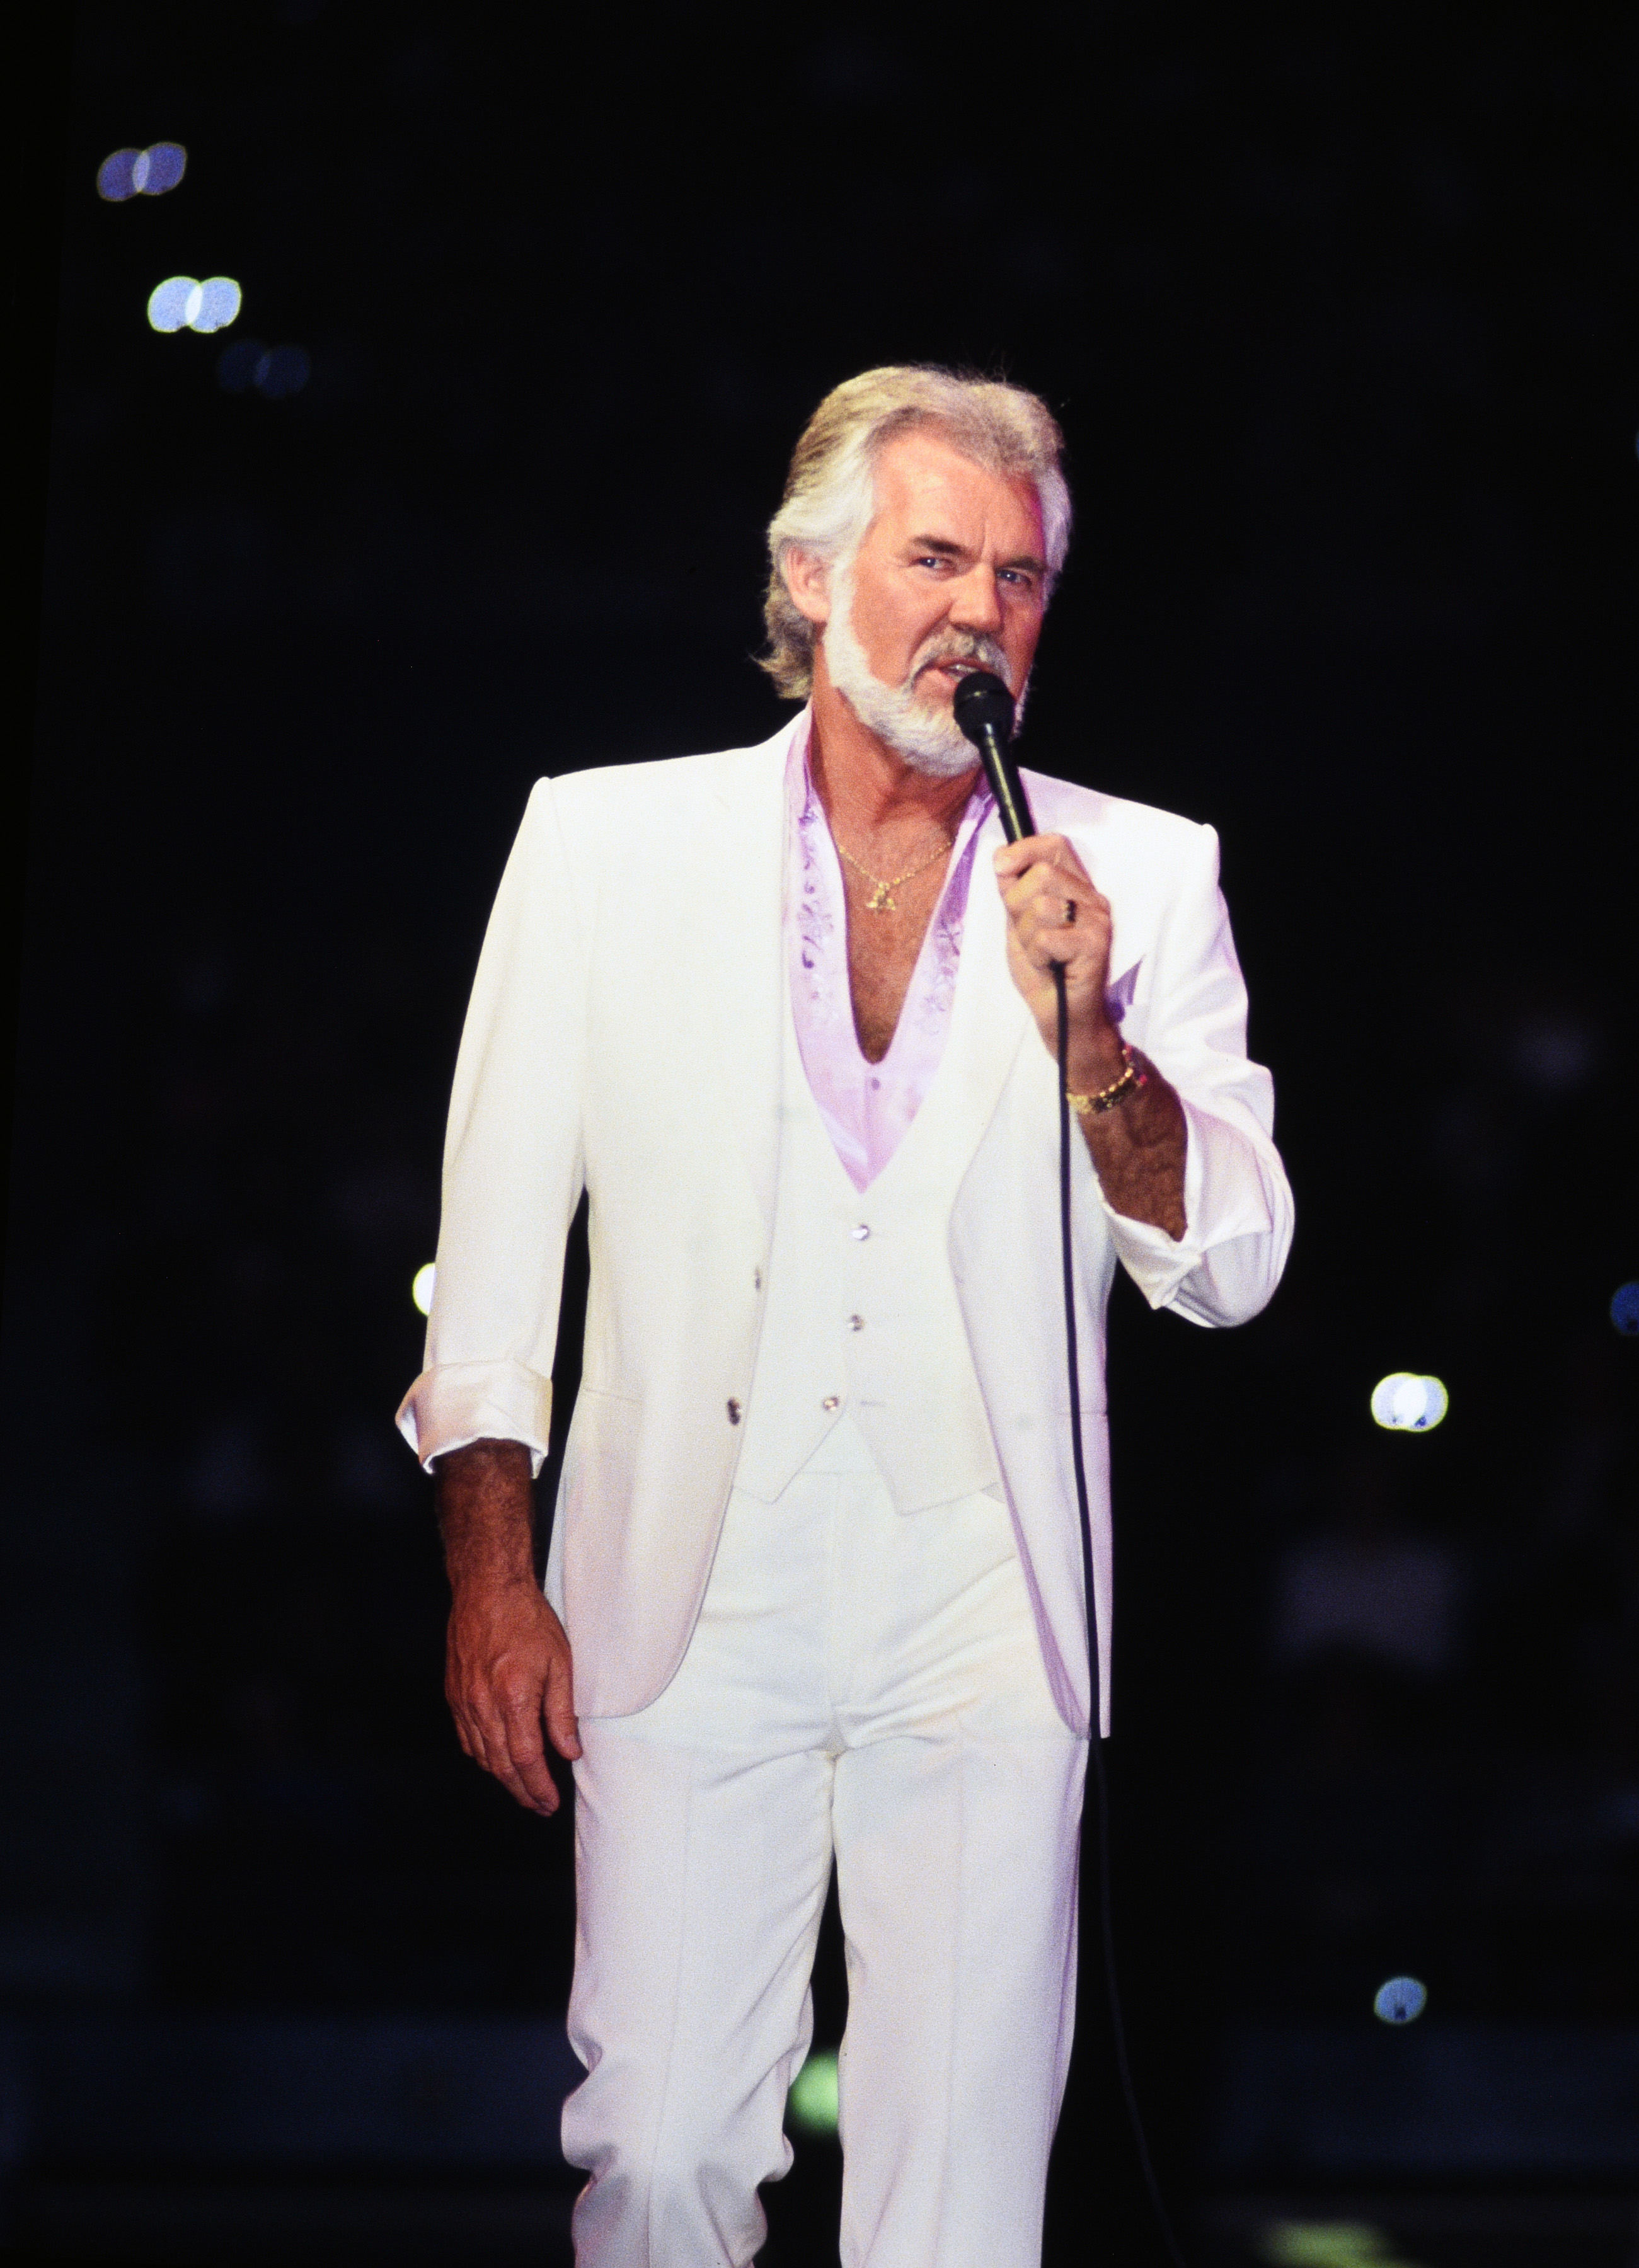 Kenny Rogers in Los Angeles, California on January 1990 | Source: Getty Images